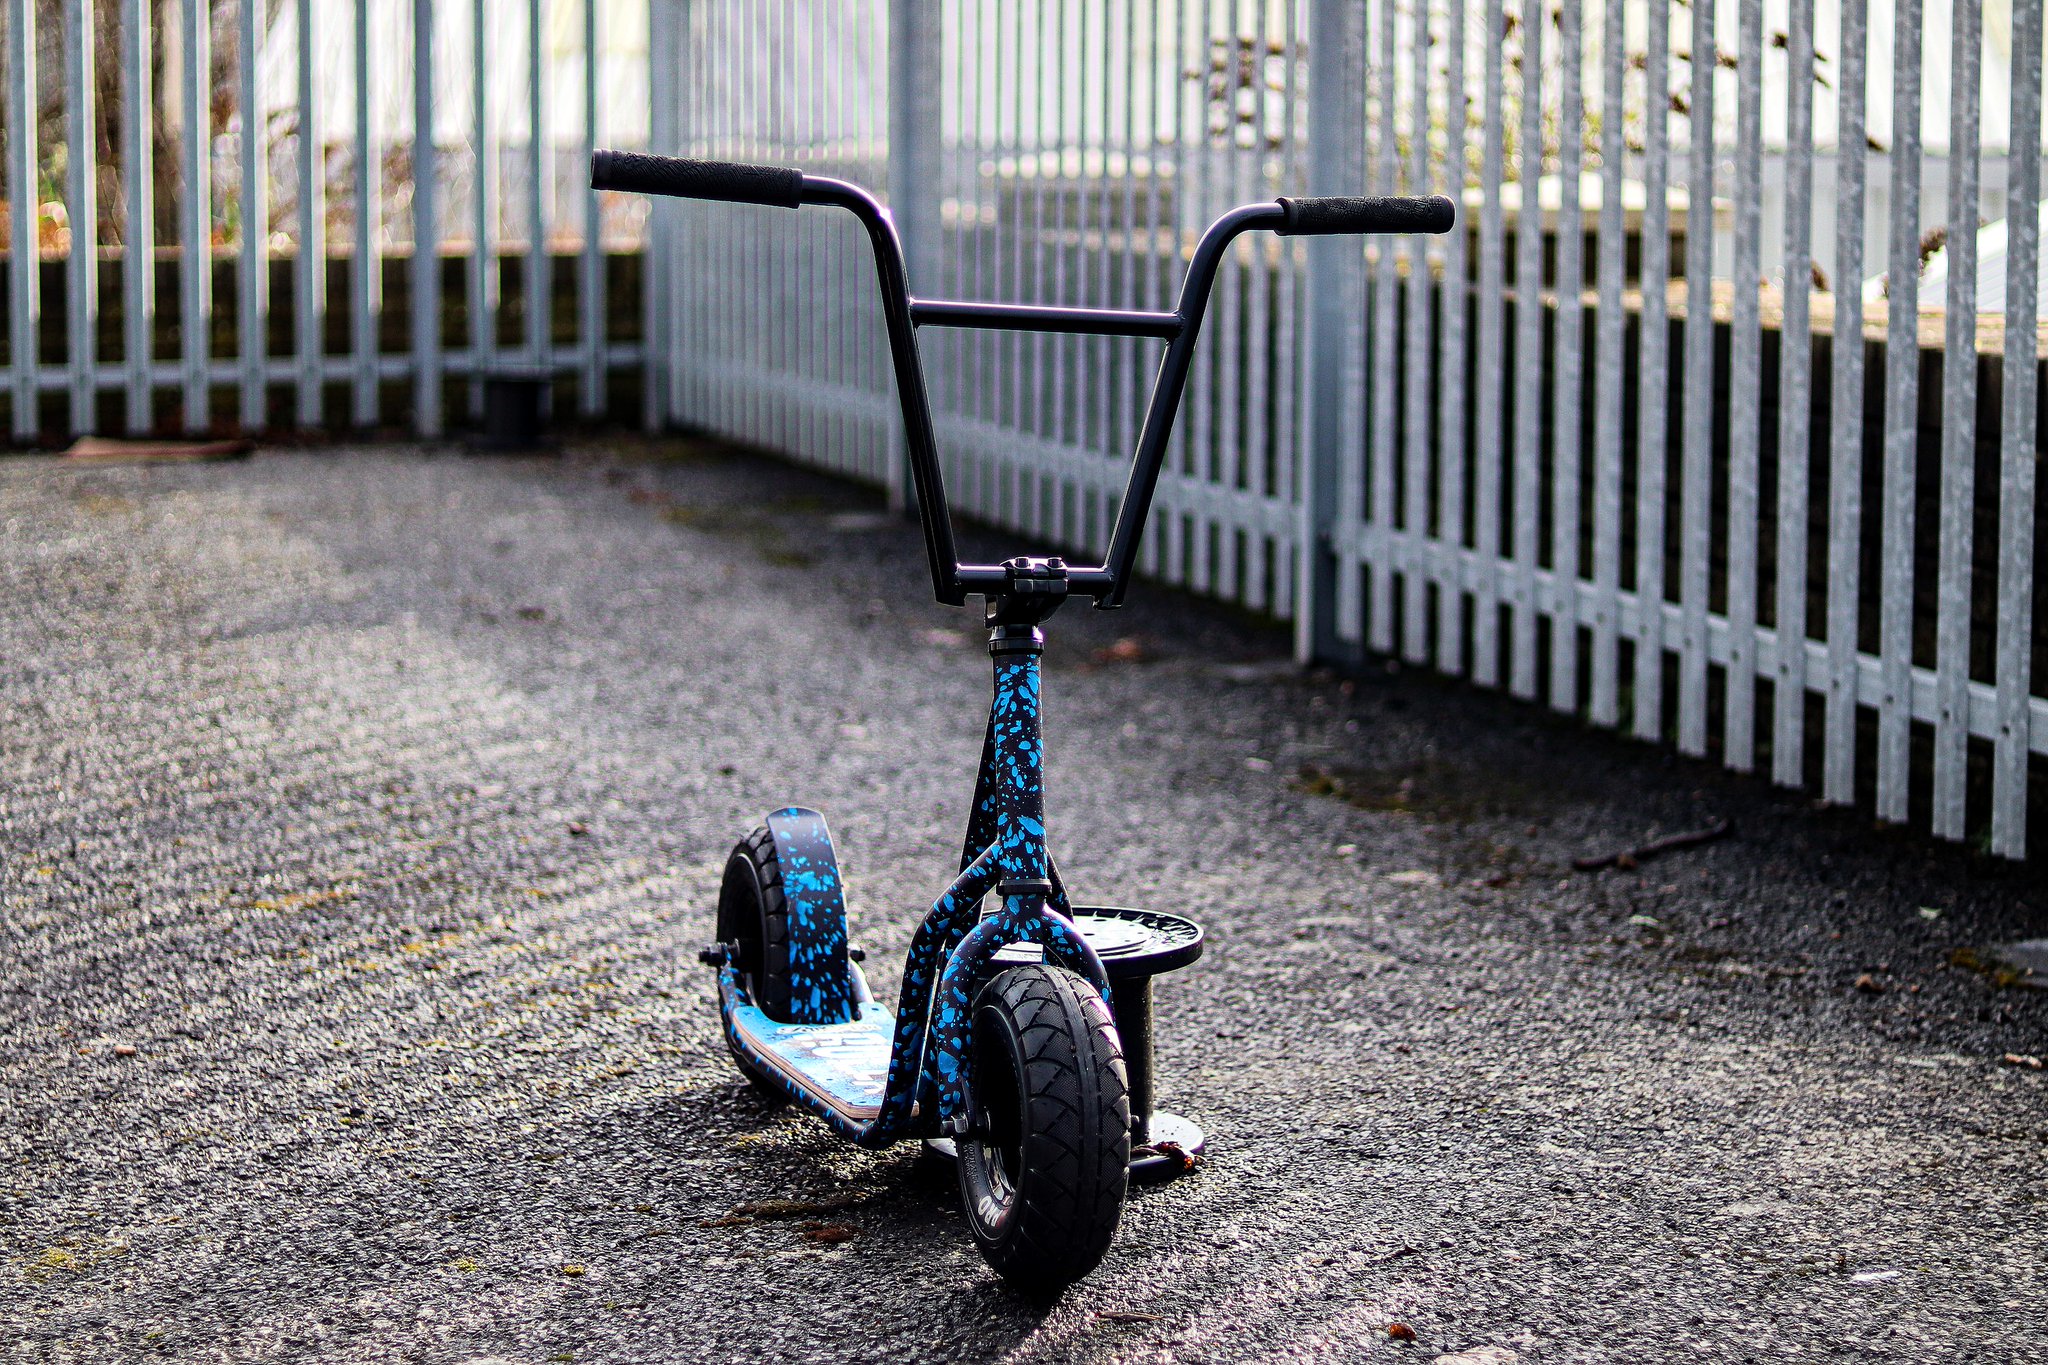 prima Indica tugurio SkateHut on Twitter: "🛴🔥Rocker Rolla Scooter🛴🔥 Built with oversized  wheels and a longer wheel base for stability to trick on the pump track or  park! Grab one here: https://t.co/BFbNUlRzHL #rocker #scooter #scooters #